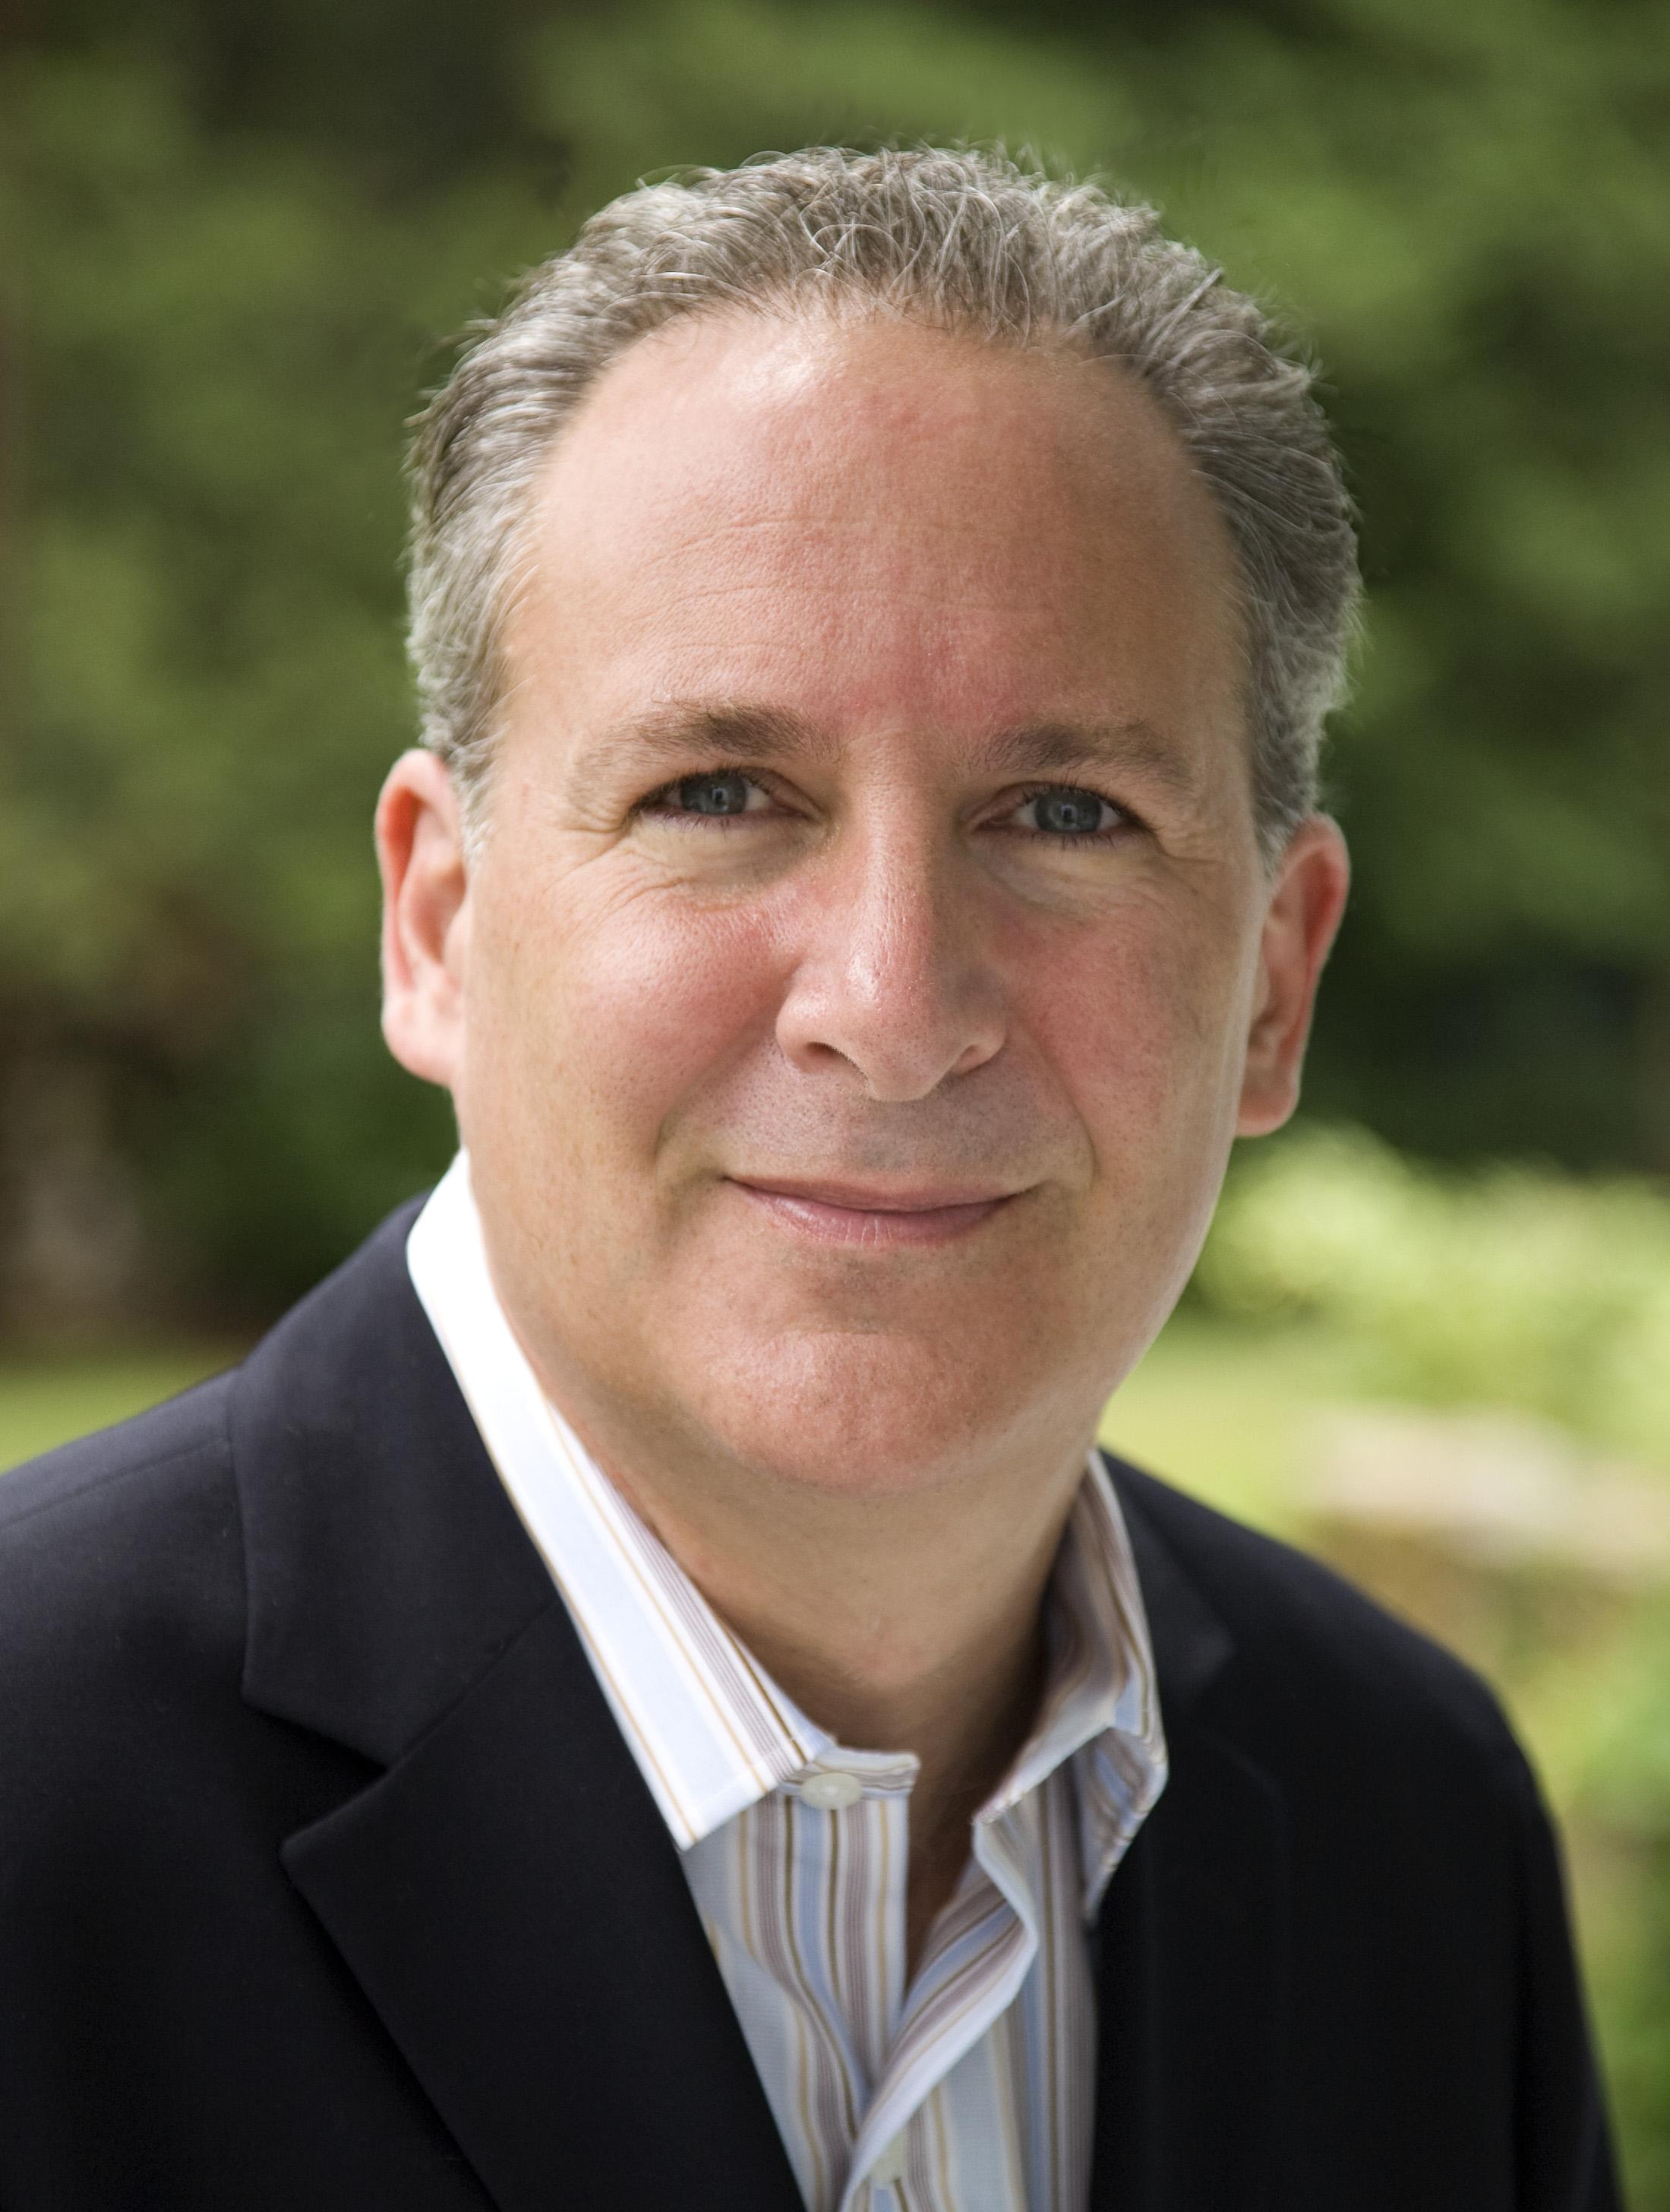 Peter Schiff is the CEO and Chief Global Strategist for Euro-Pacific Capital and Euro-Pacific Precious Metals. He's the author of the best-selling books Crash Proof and The Real Crash.